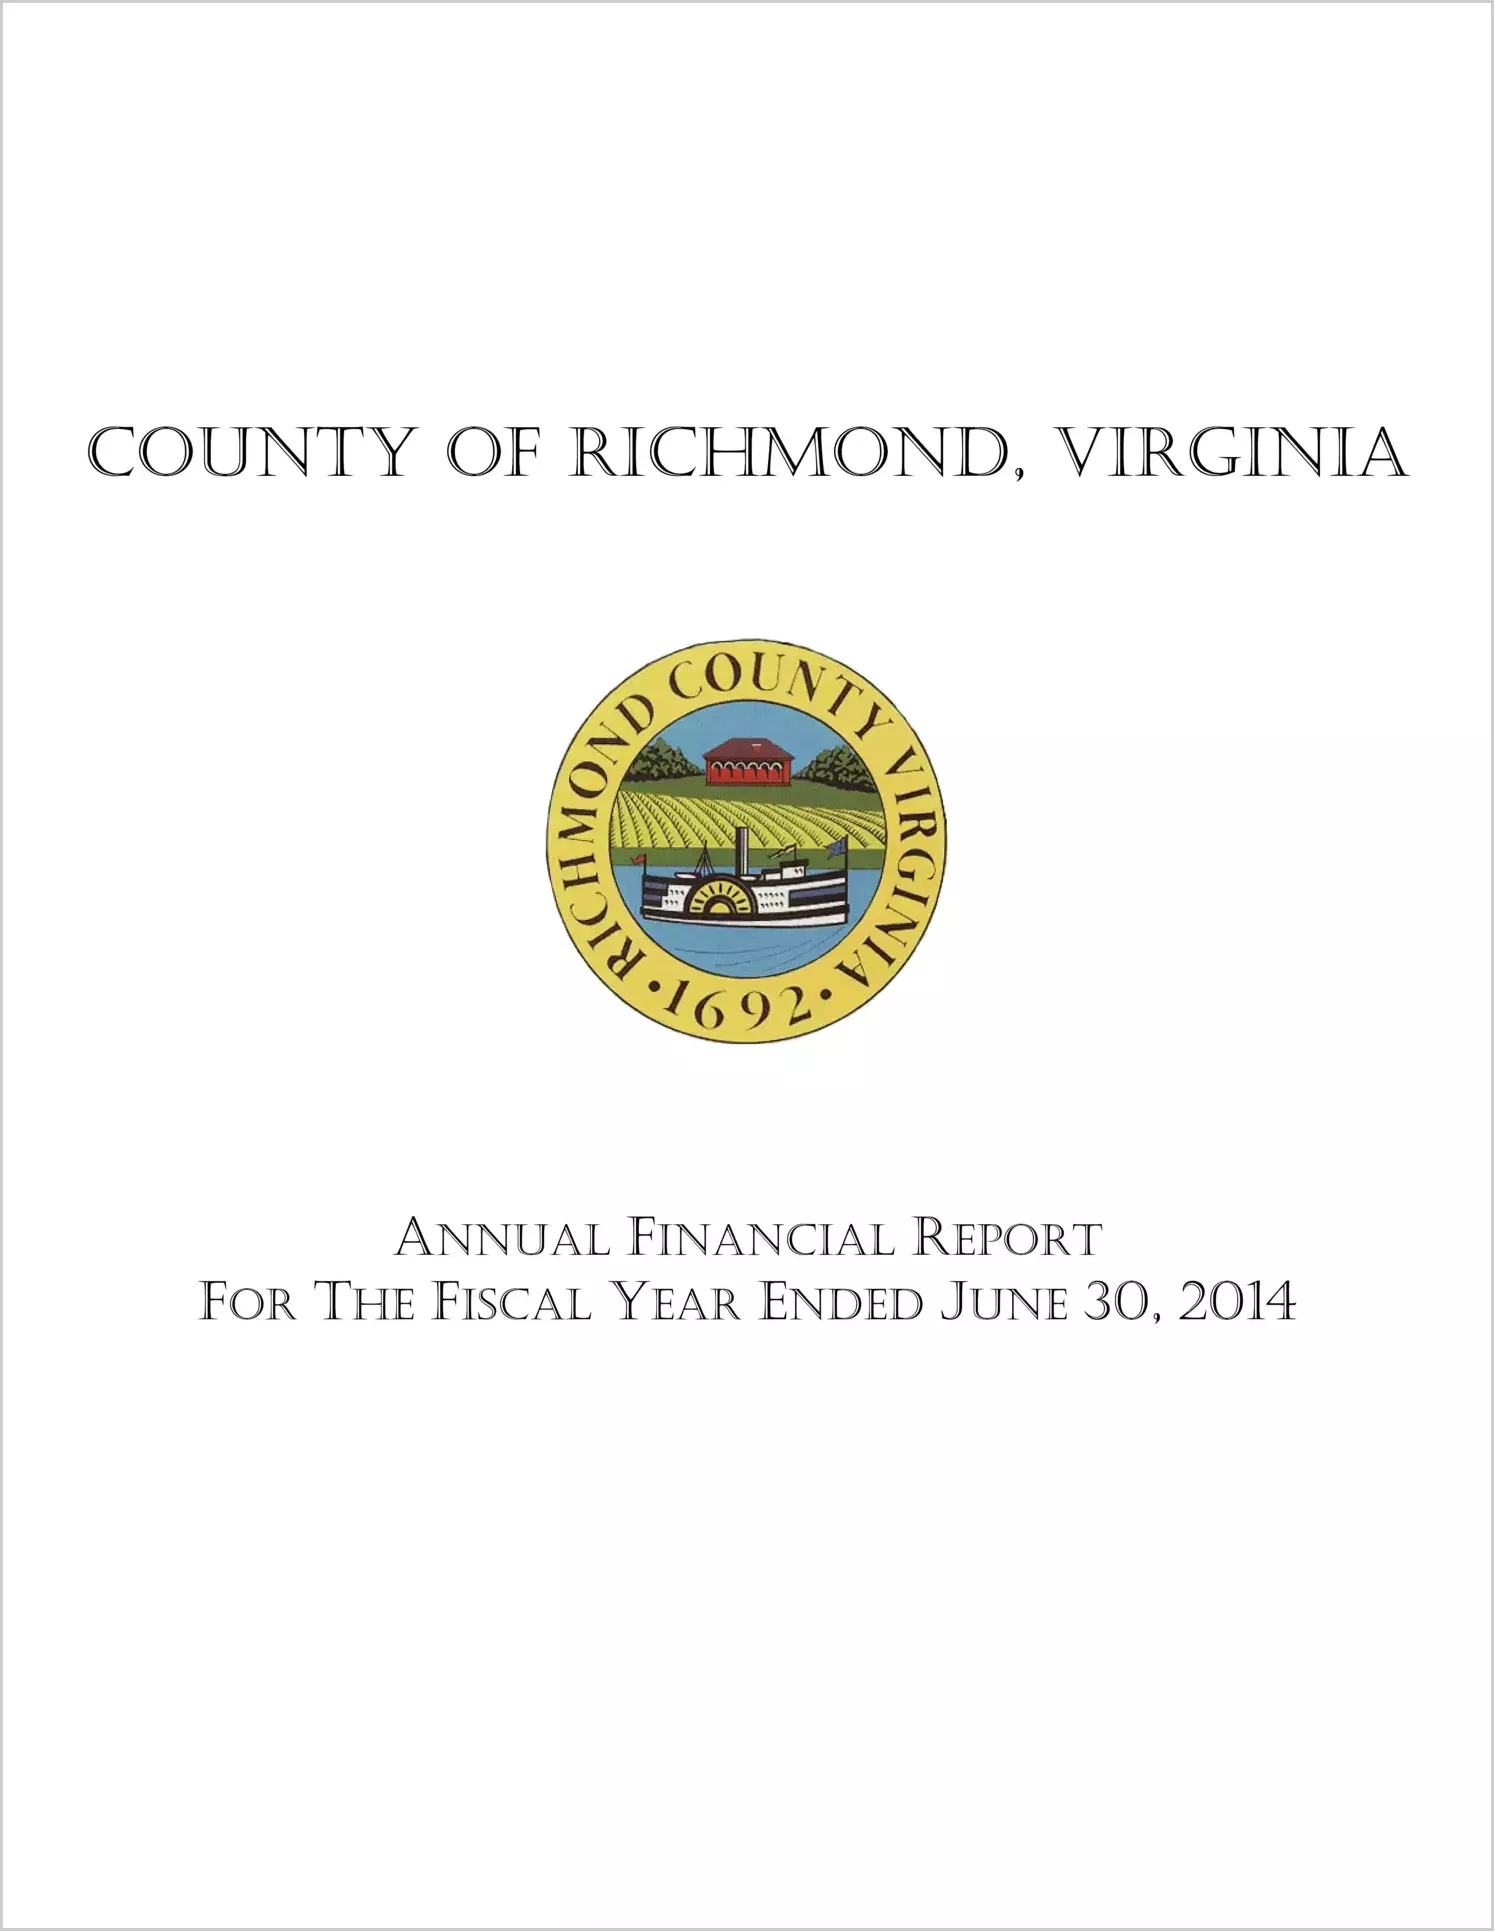 2014 Annual Financial Report for County of Richmond